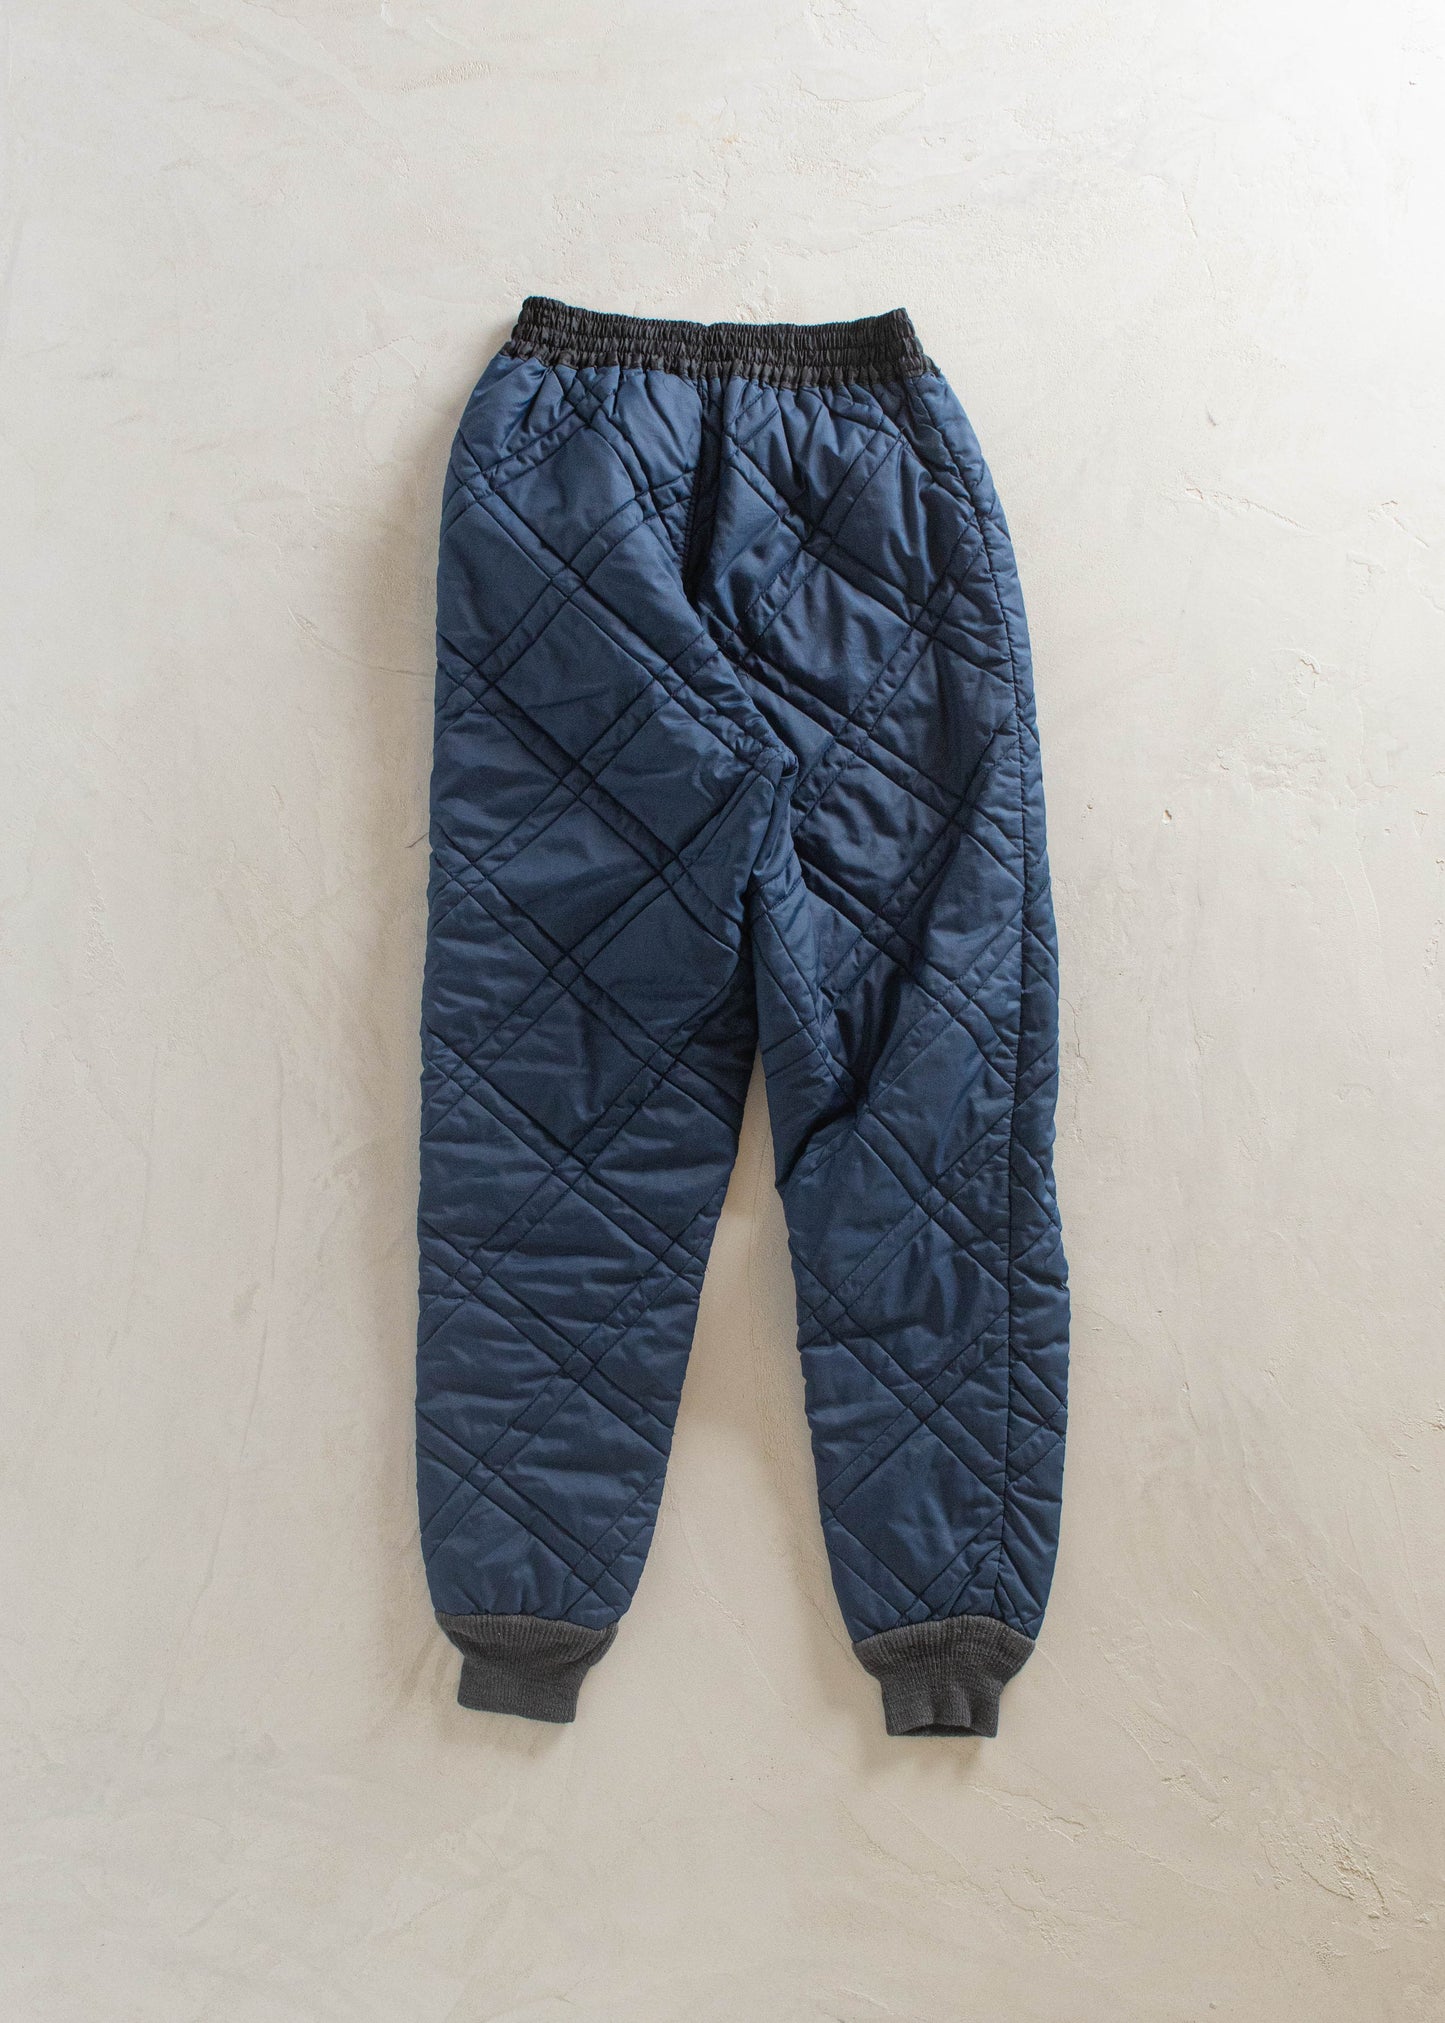 1980s Quilted Liner Pants Size XS/S